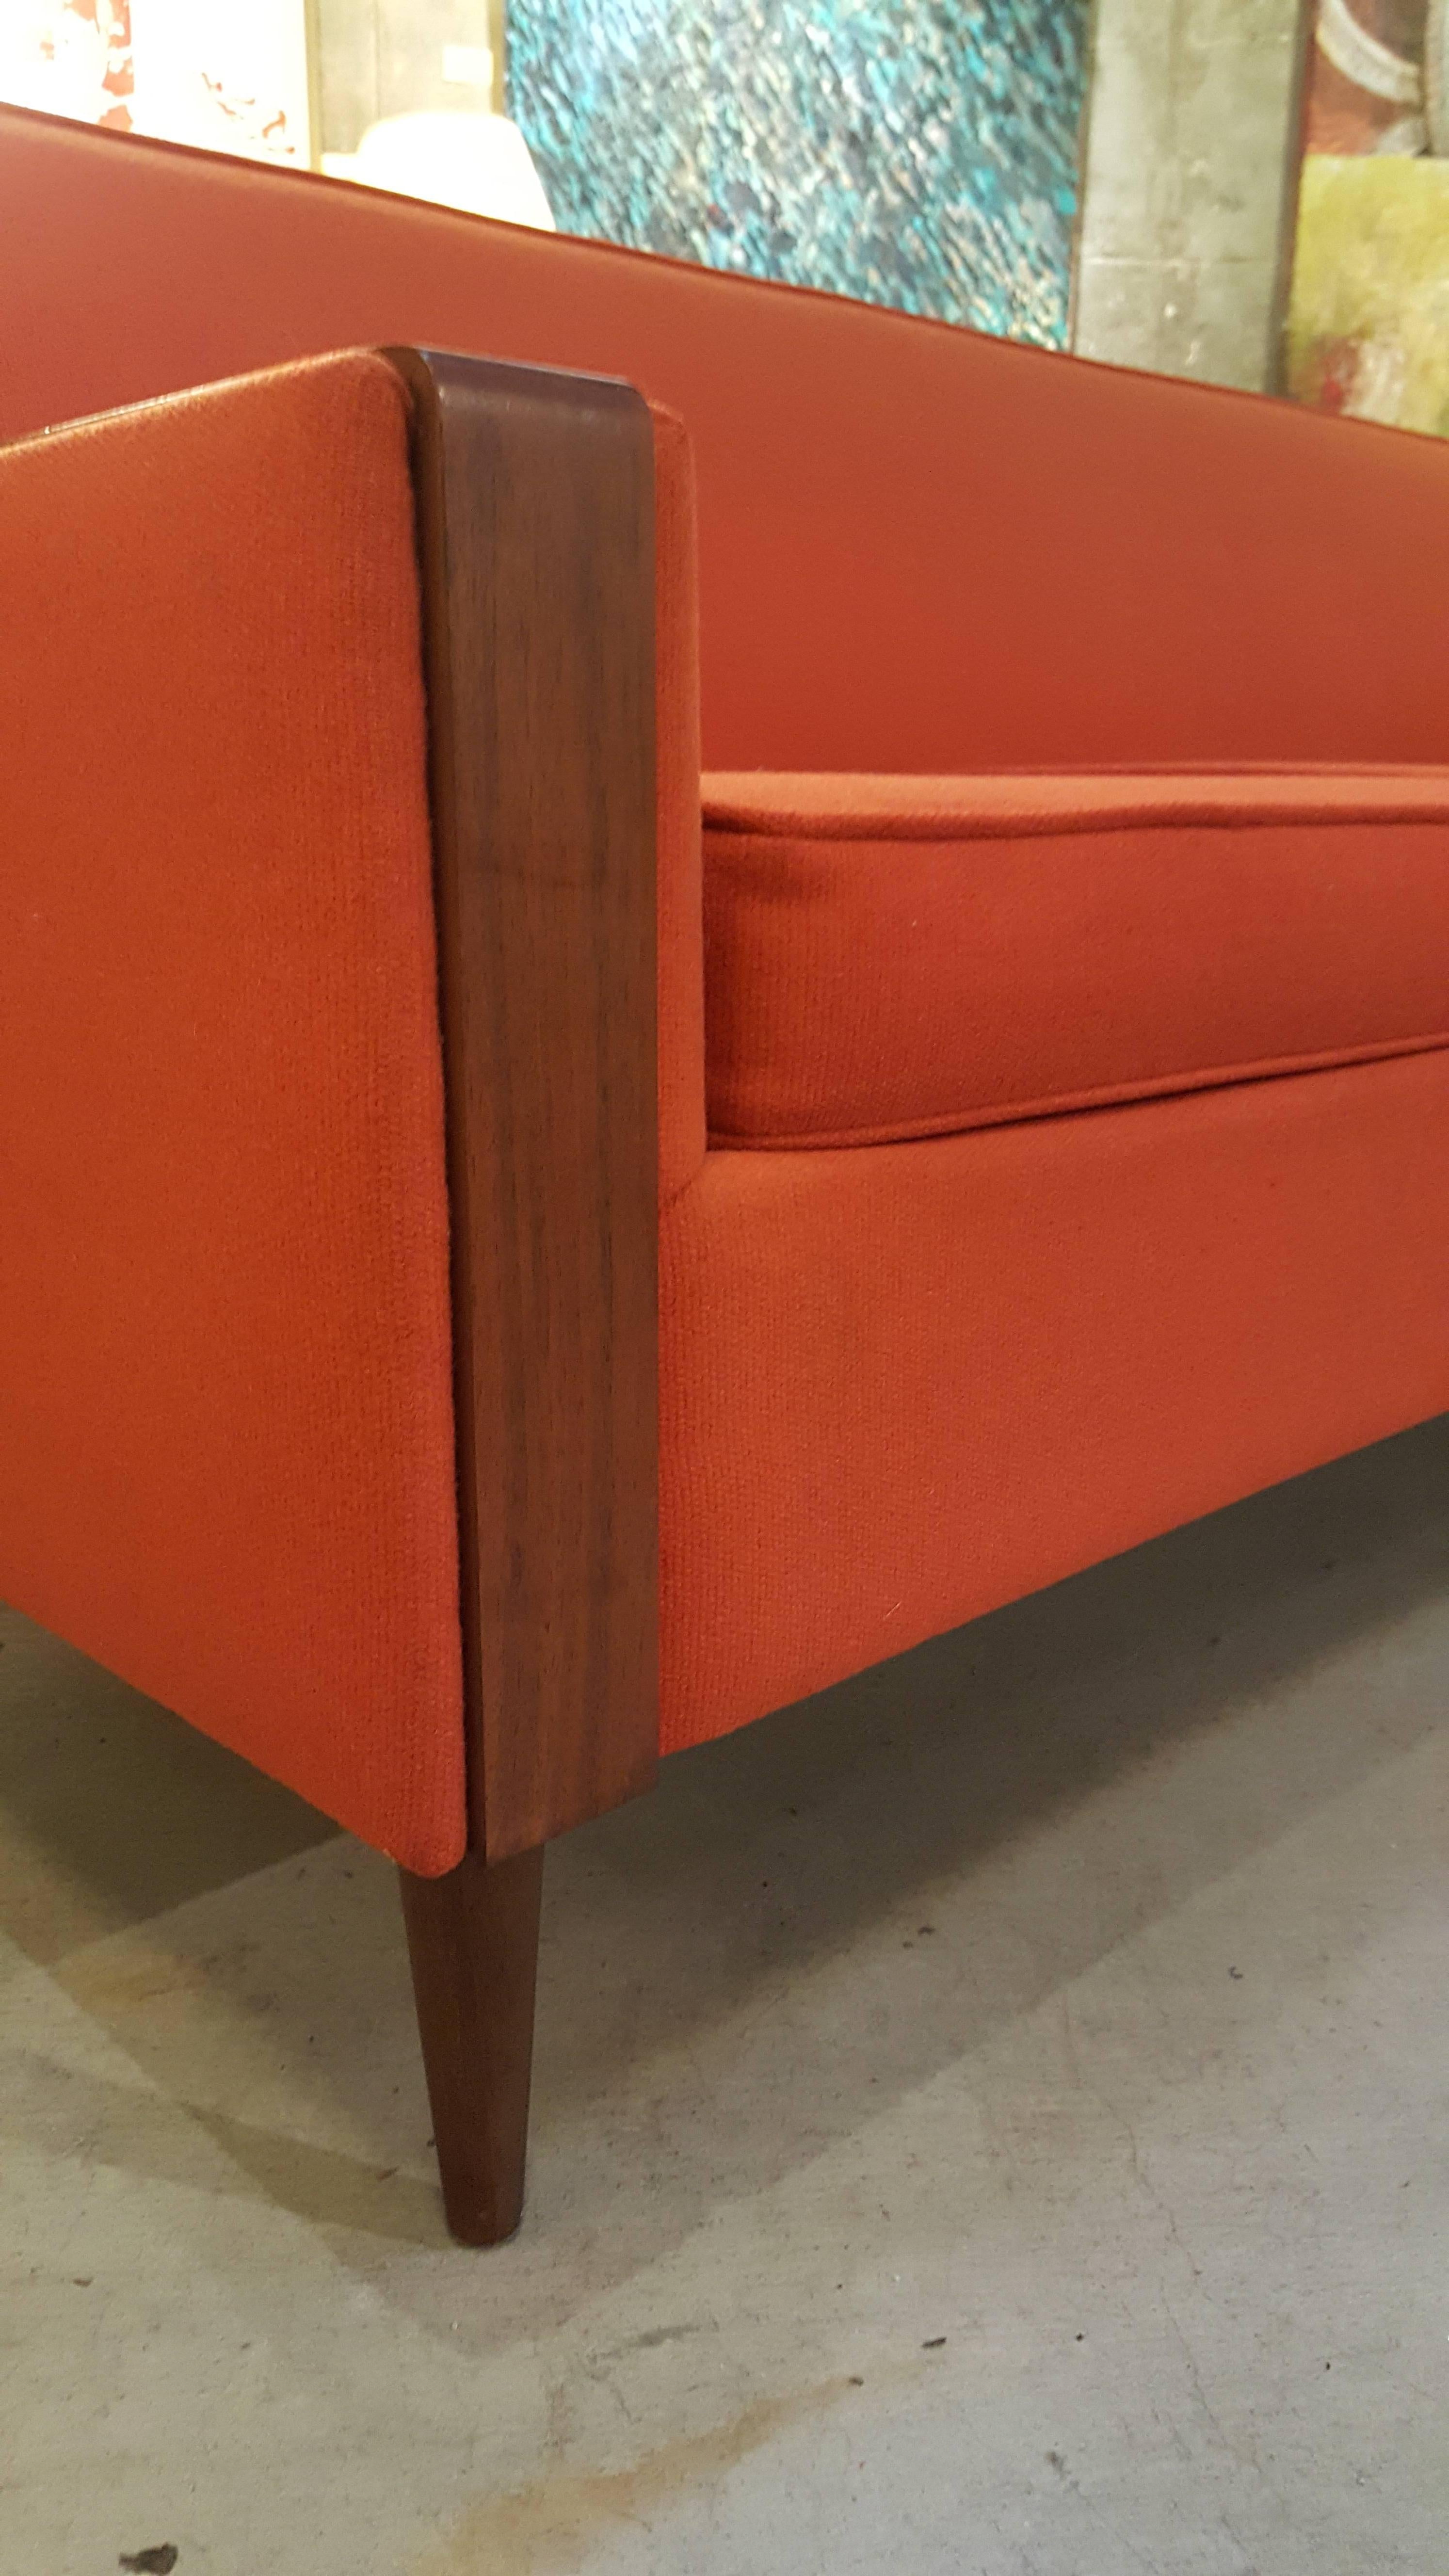 1960s Mid-Century Modern sofa with walnut detail to arms and Classic peg leg design. Good geometric lines in the style of Paul McCobb. Original upholstery in good condition with moderate wear. Re-upholstery recommended.